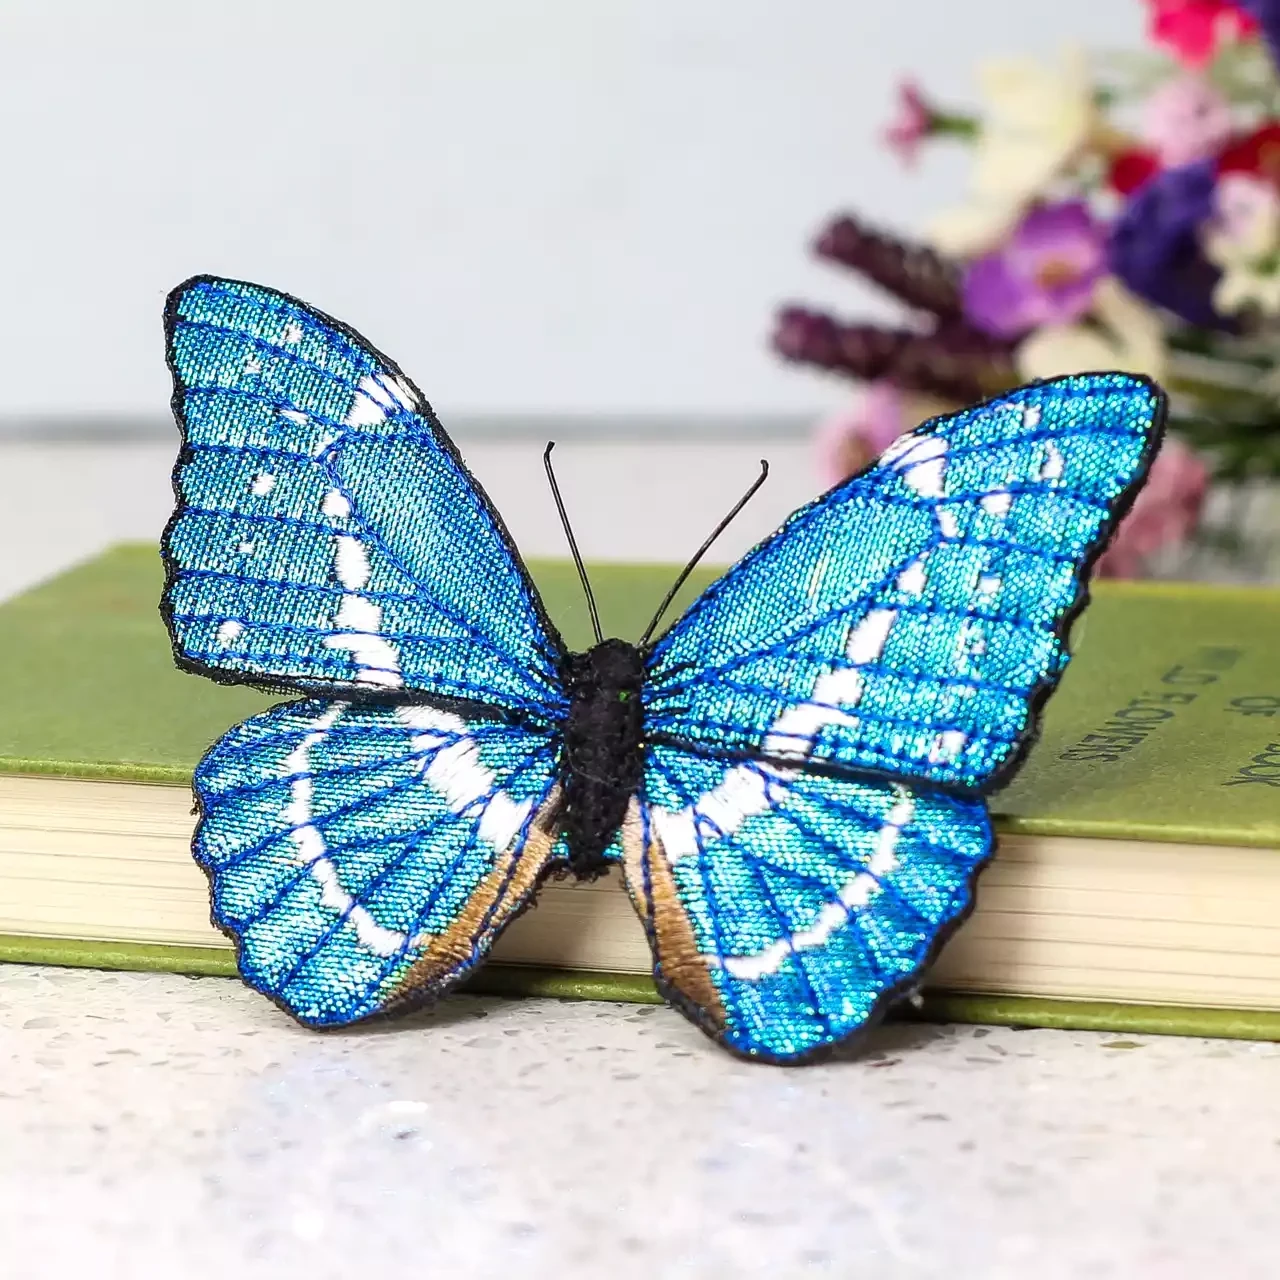 Hand Painted and Embroidered Fabric Brooch - Blue Morpho Butterfly by Vikki Lafford Garside